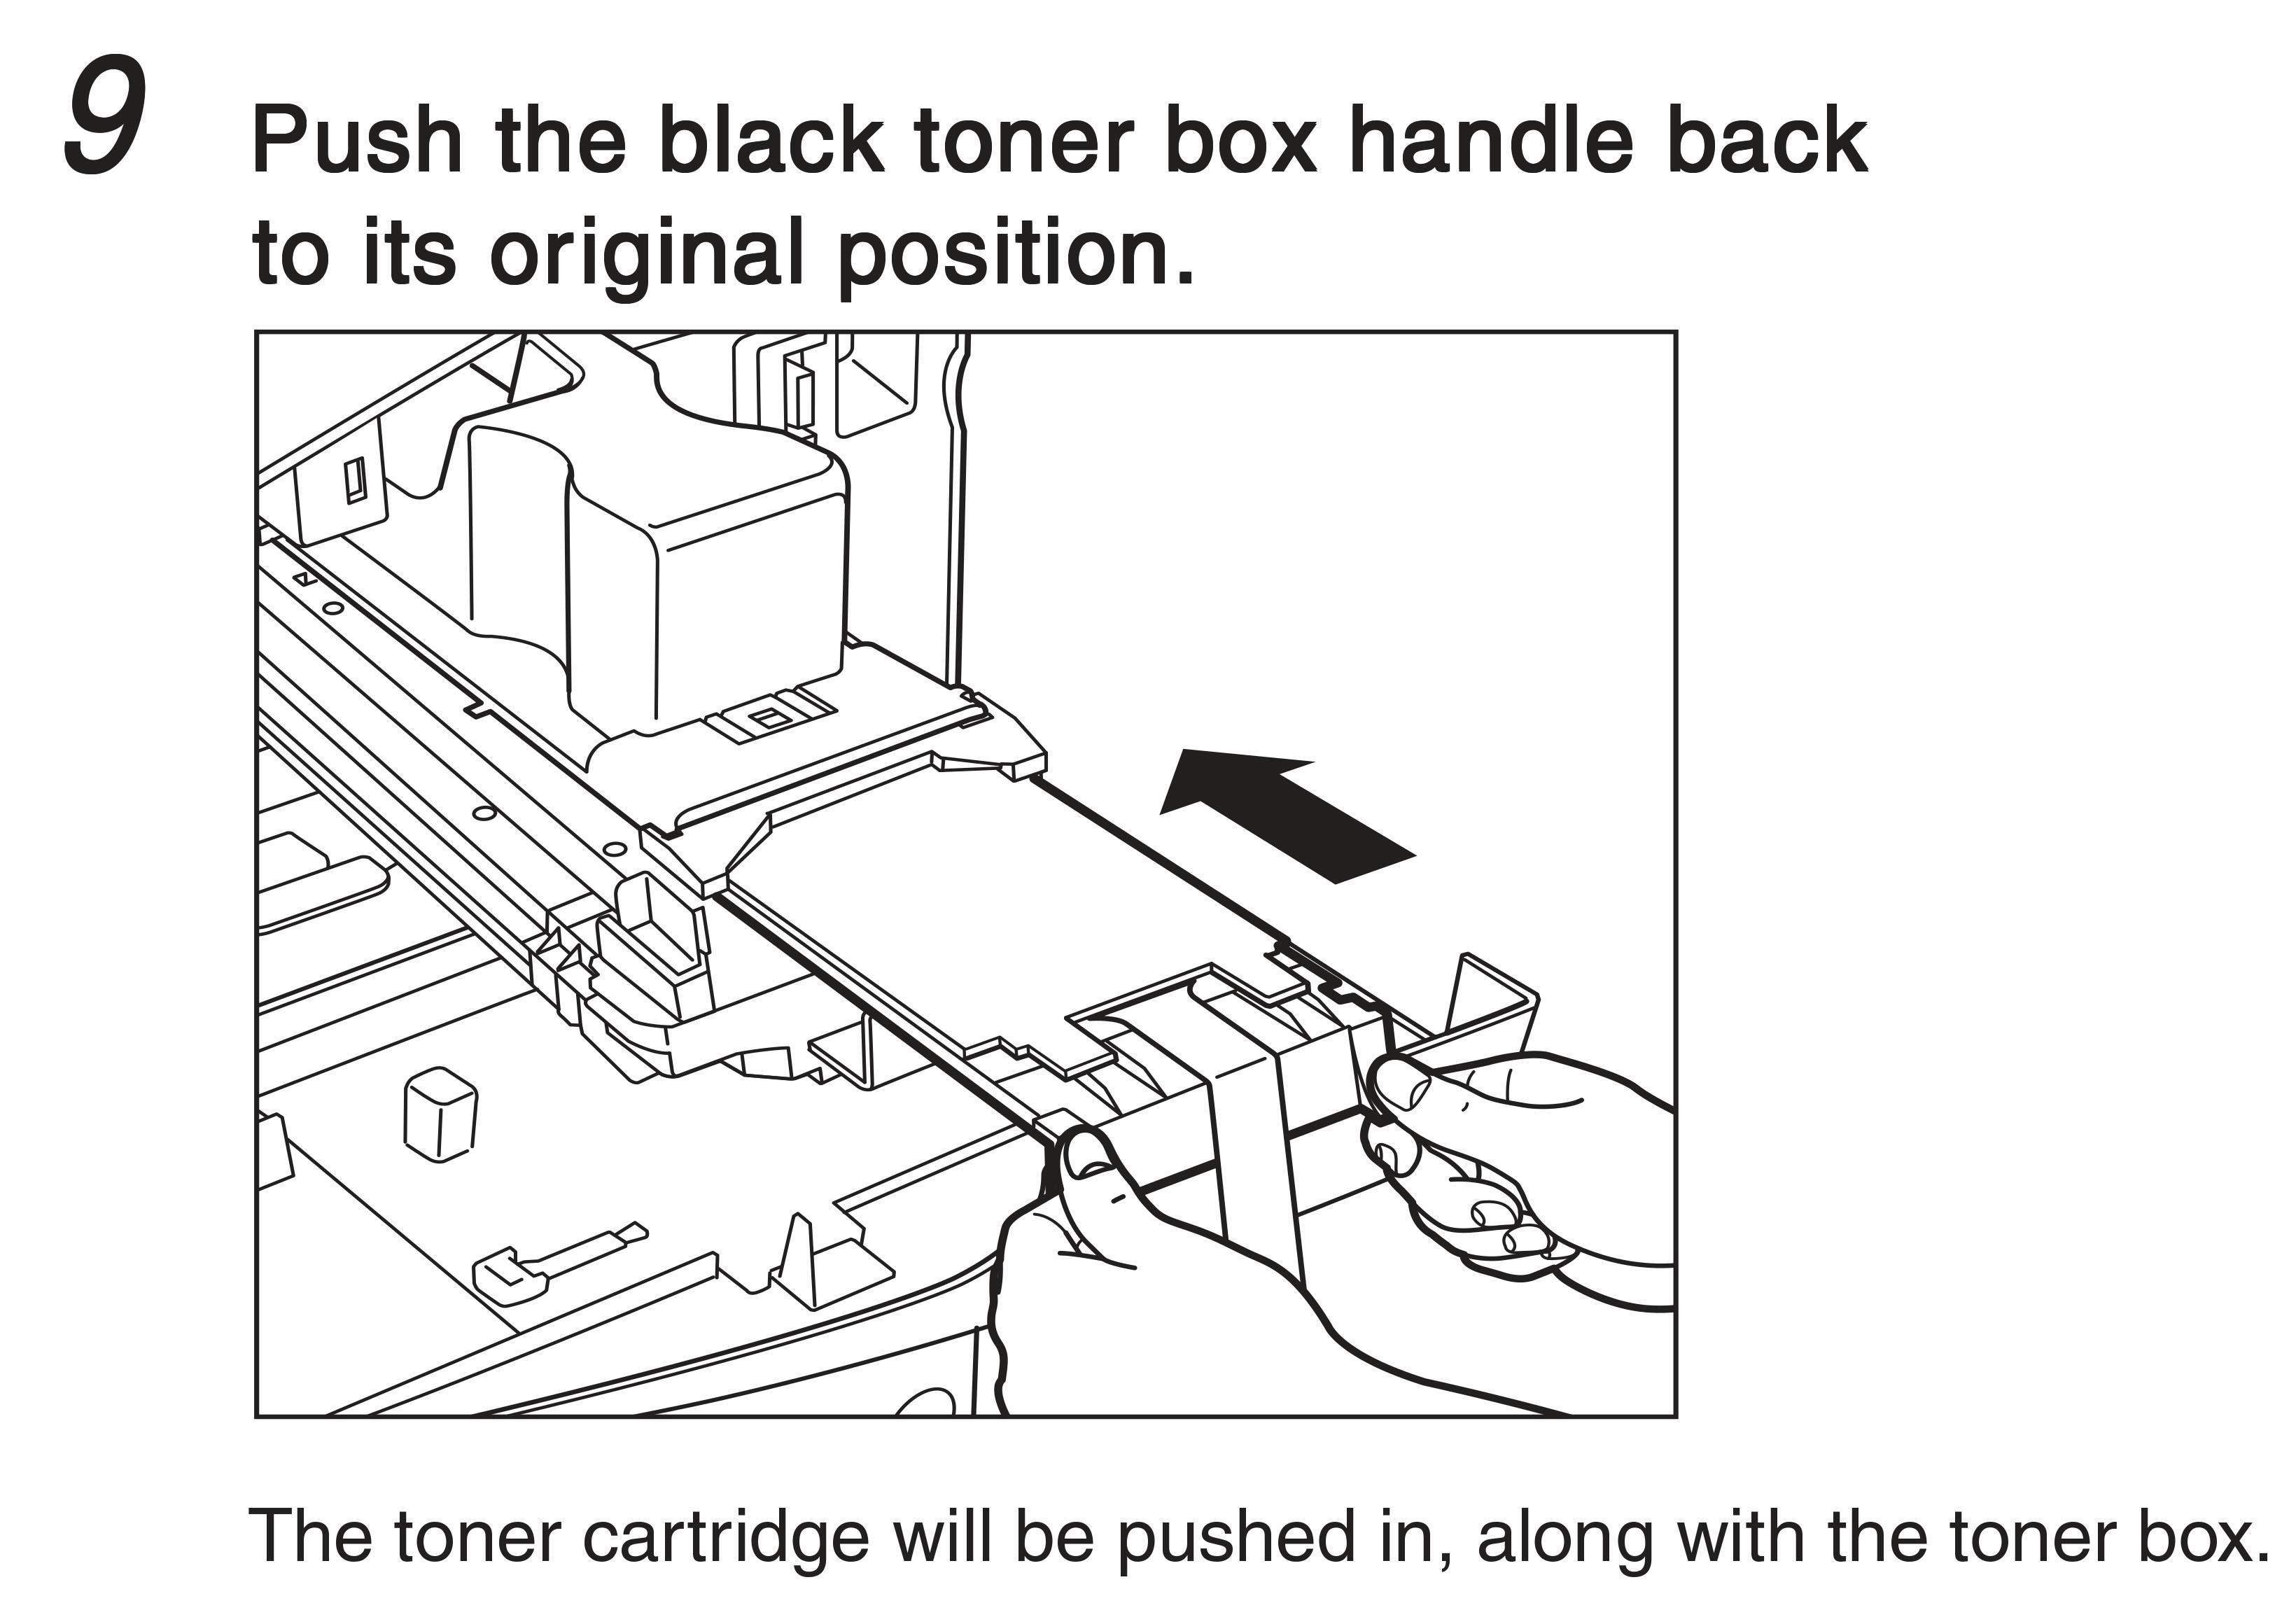 9. Push the black toner box handle back to its original position. The tonar cartridge will be pushed in, along with the toner box.